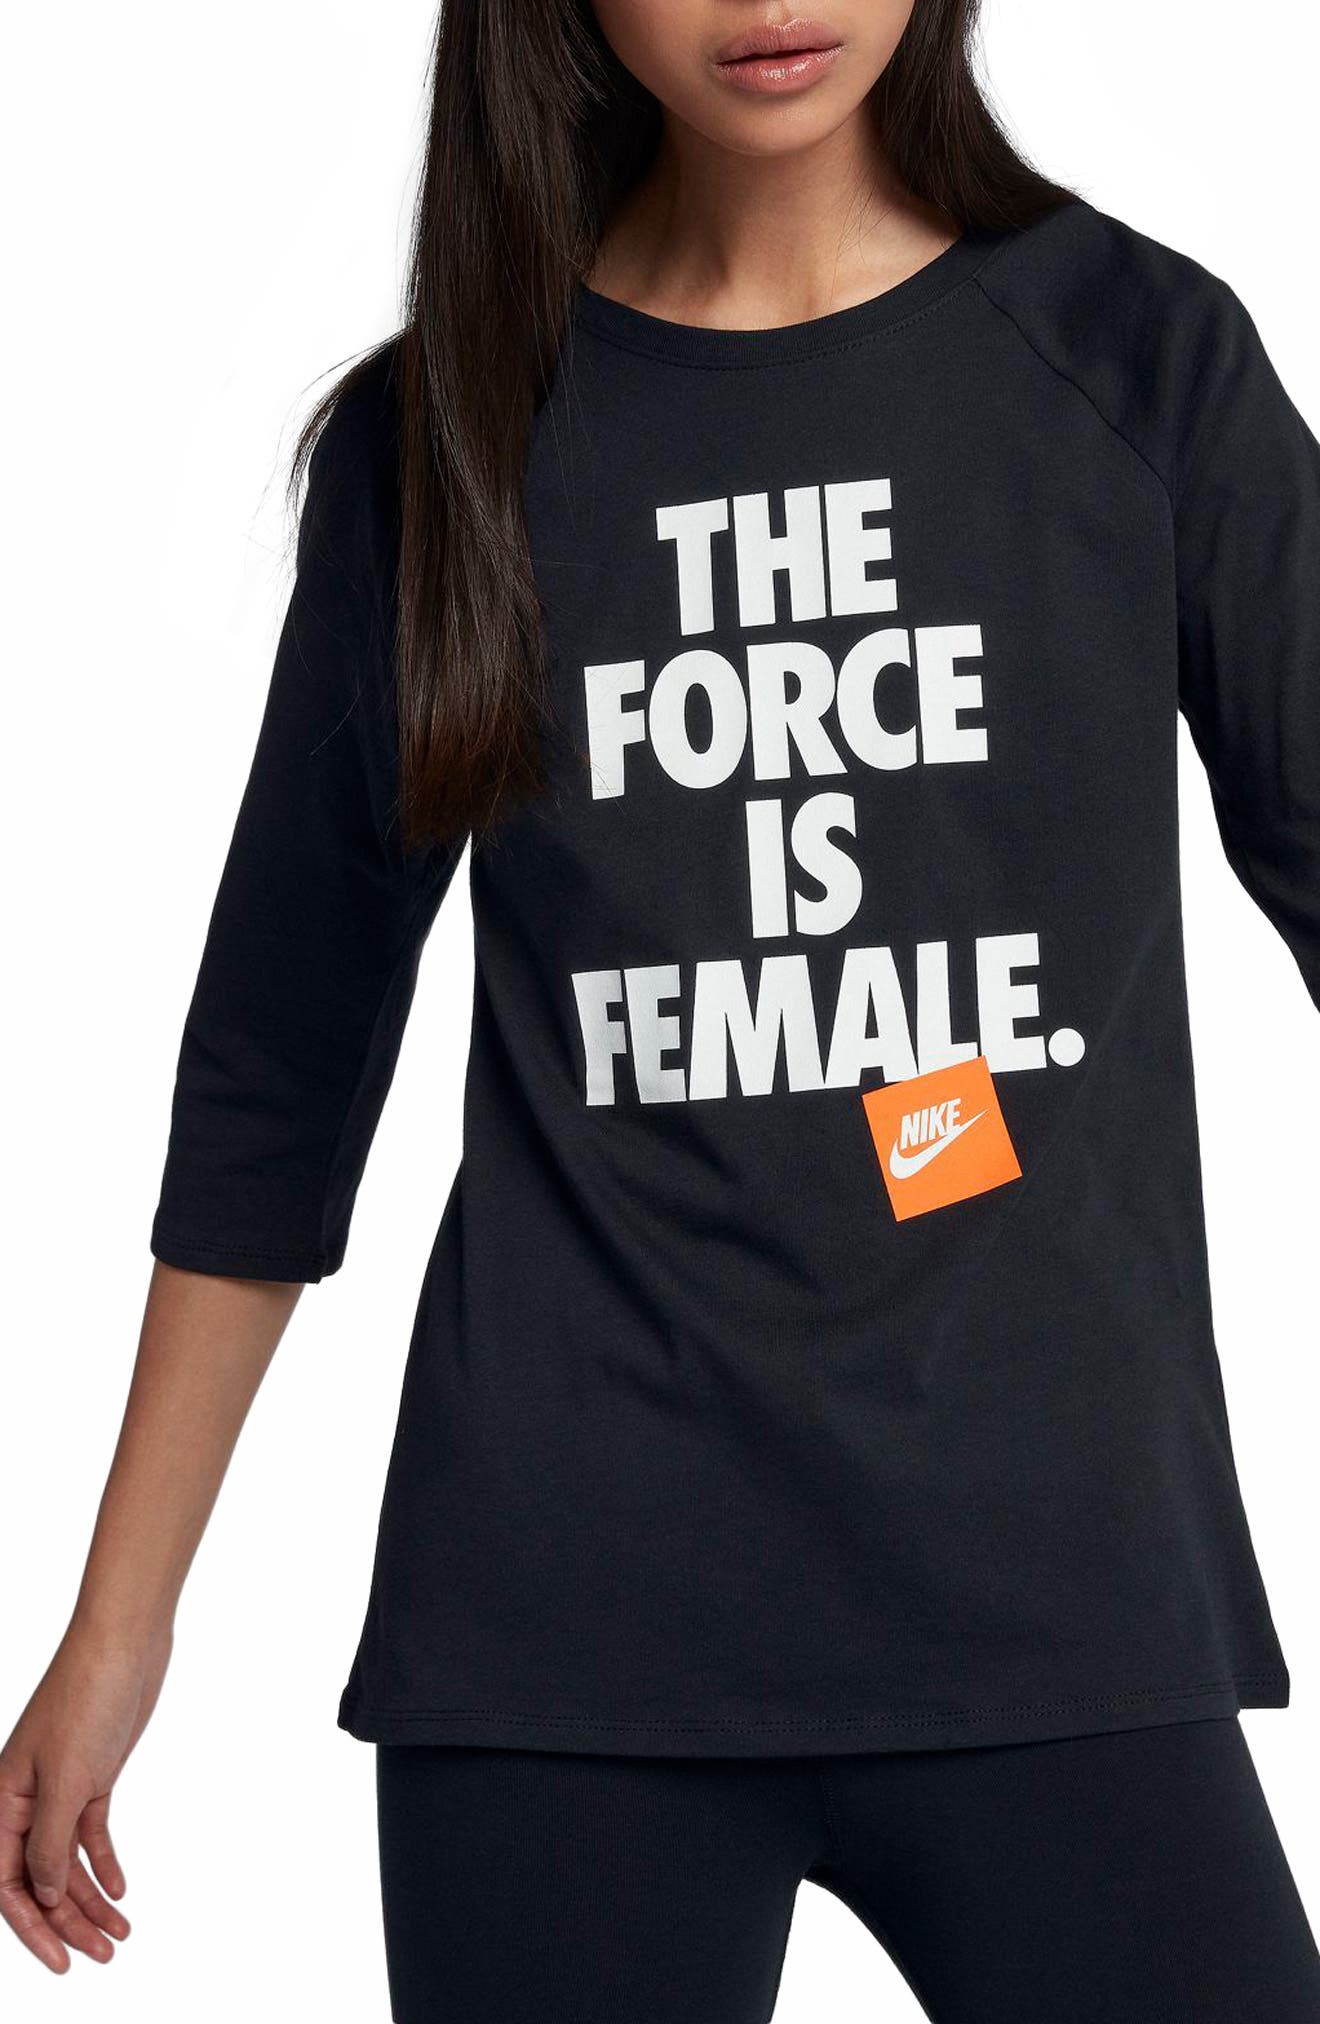 the force is female t shirt nike 